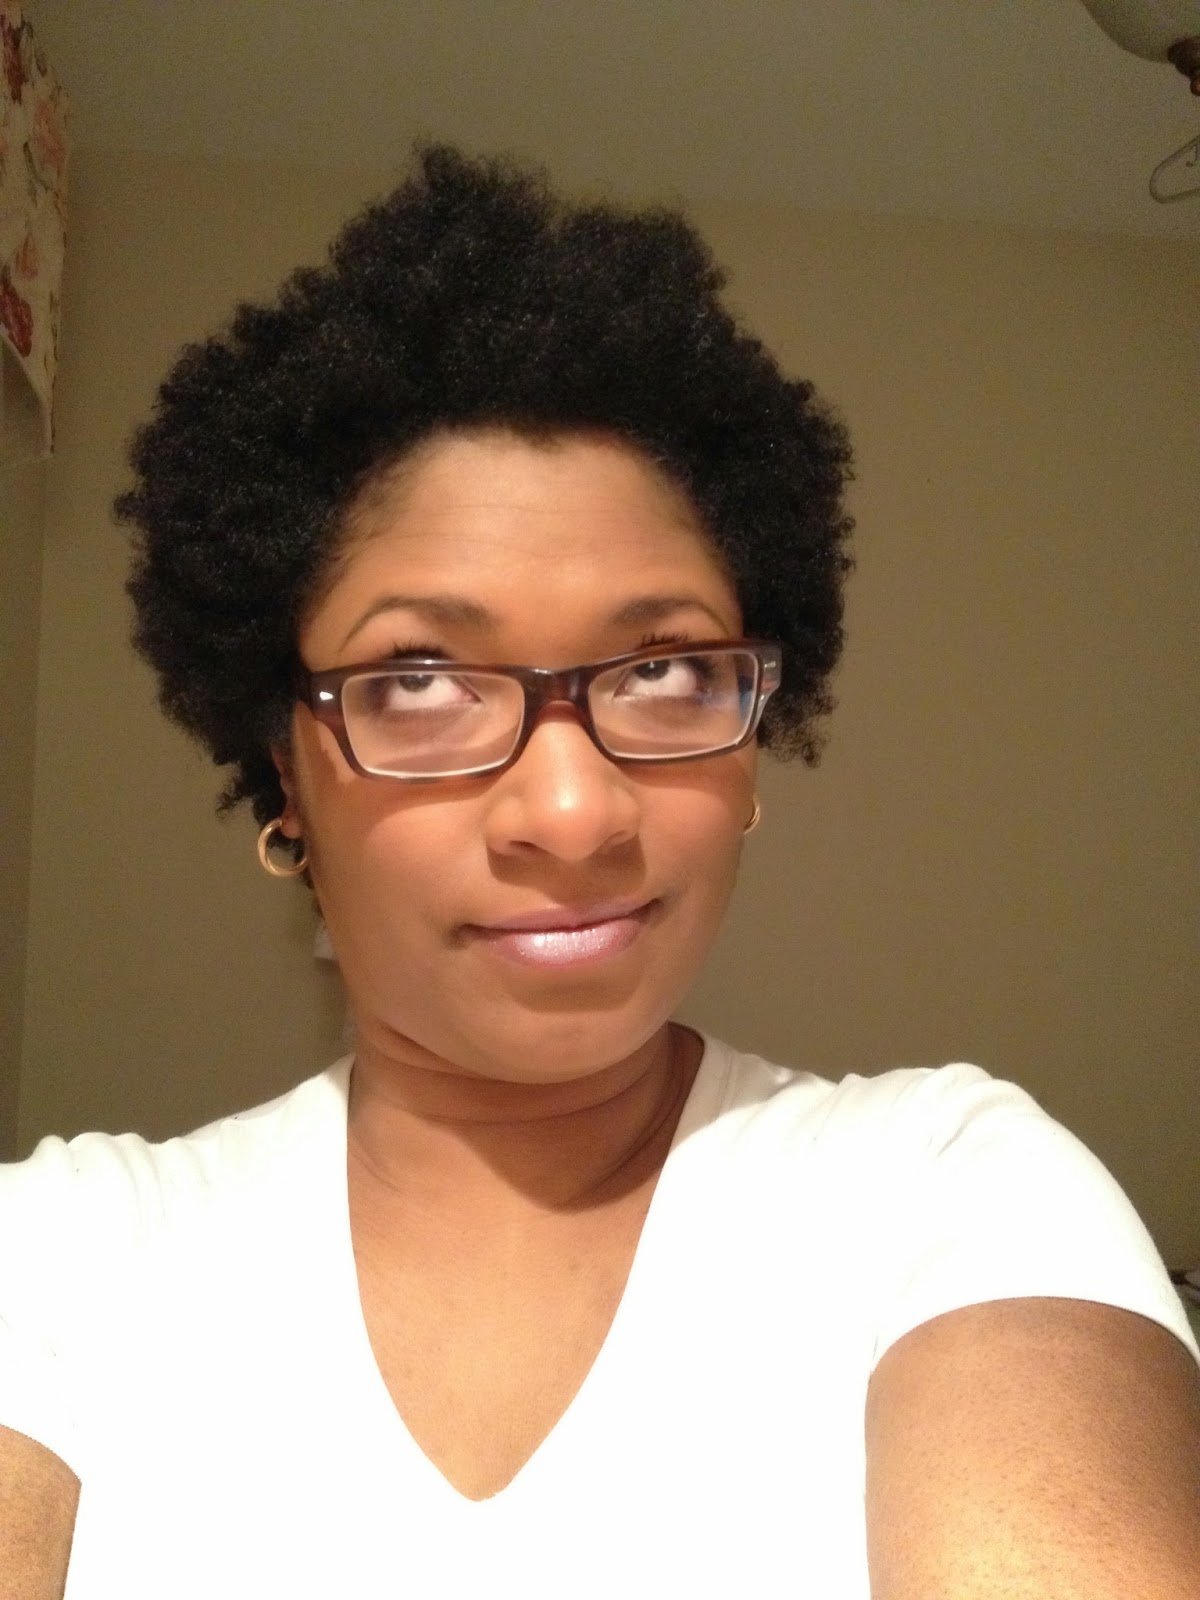 natural hair journey